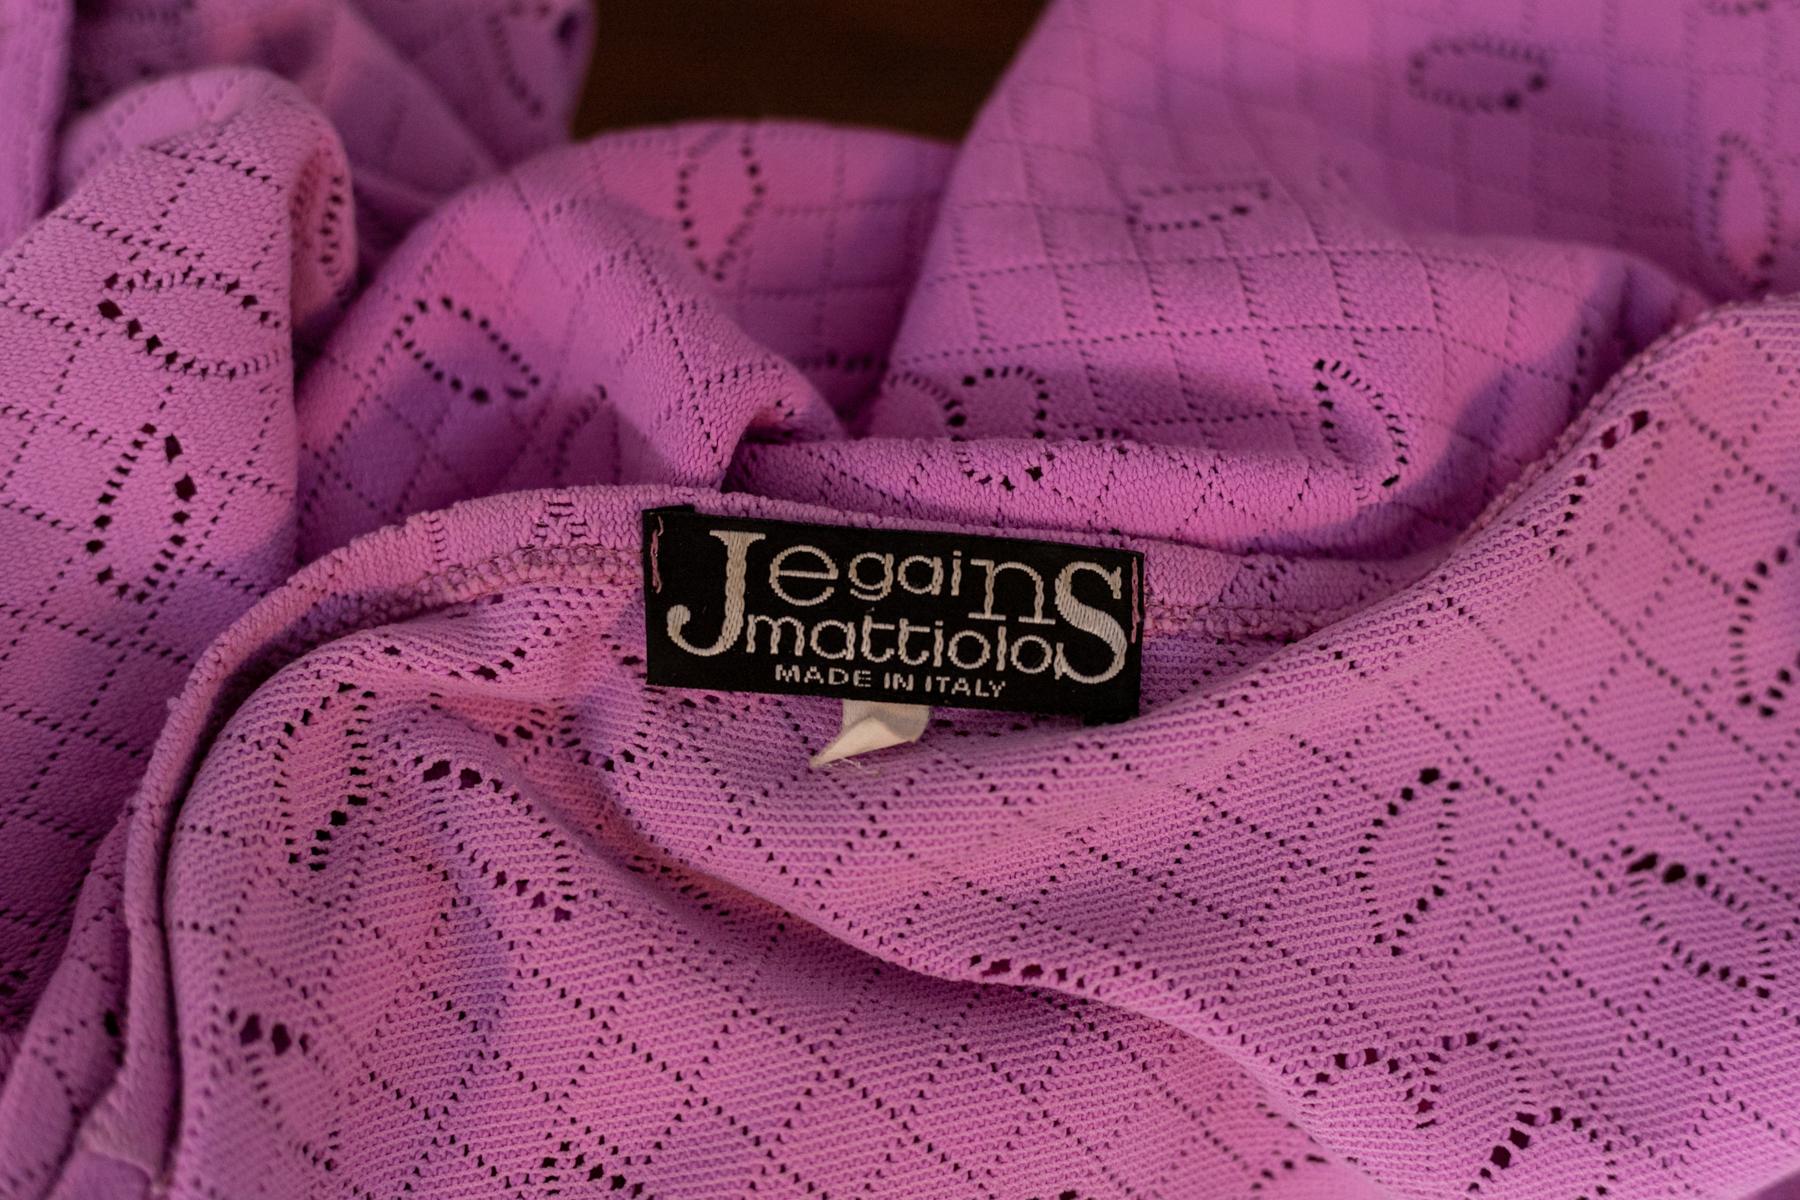 Lovely, colourful light purple buttoned jumper designed by Gai Mattiolo in the 1990s, made in Italy. Original label.
The jumper is made from a light violet cotton, very nice.
The neckline is deep, but not vulgar, it ties with 4 pink buttons that